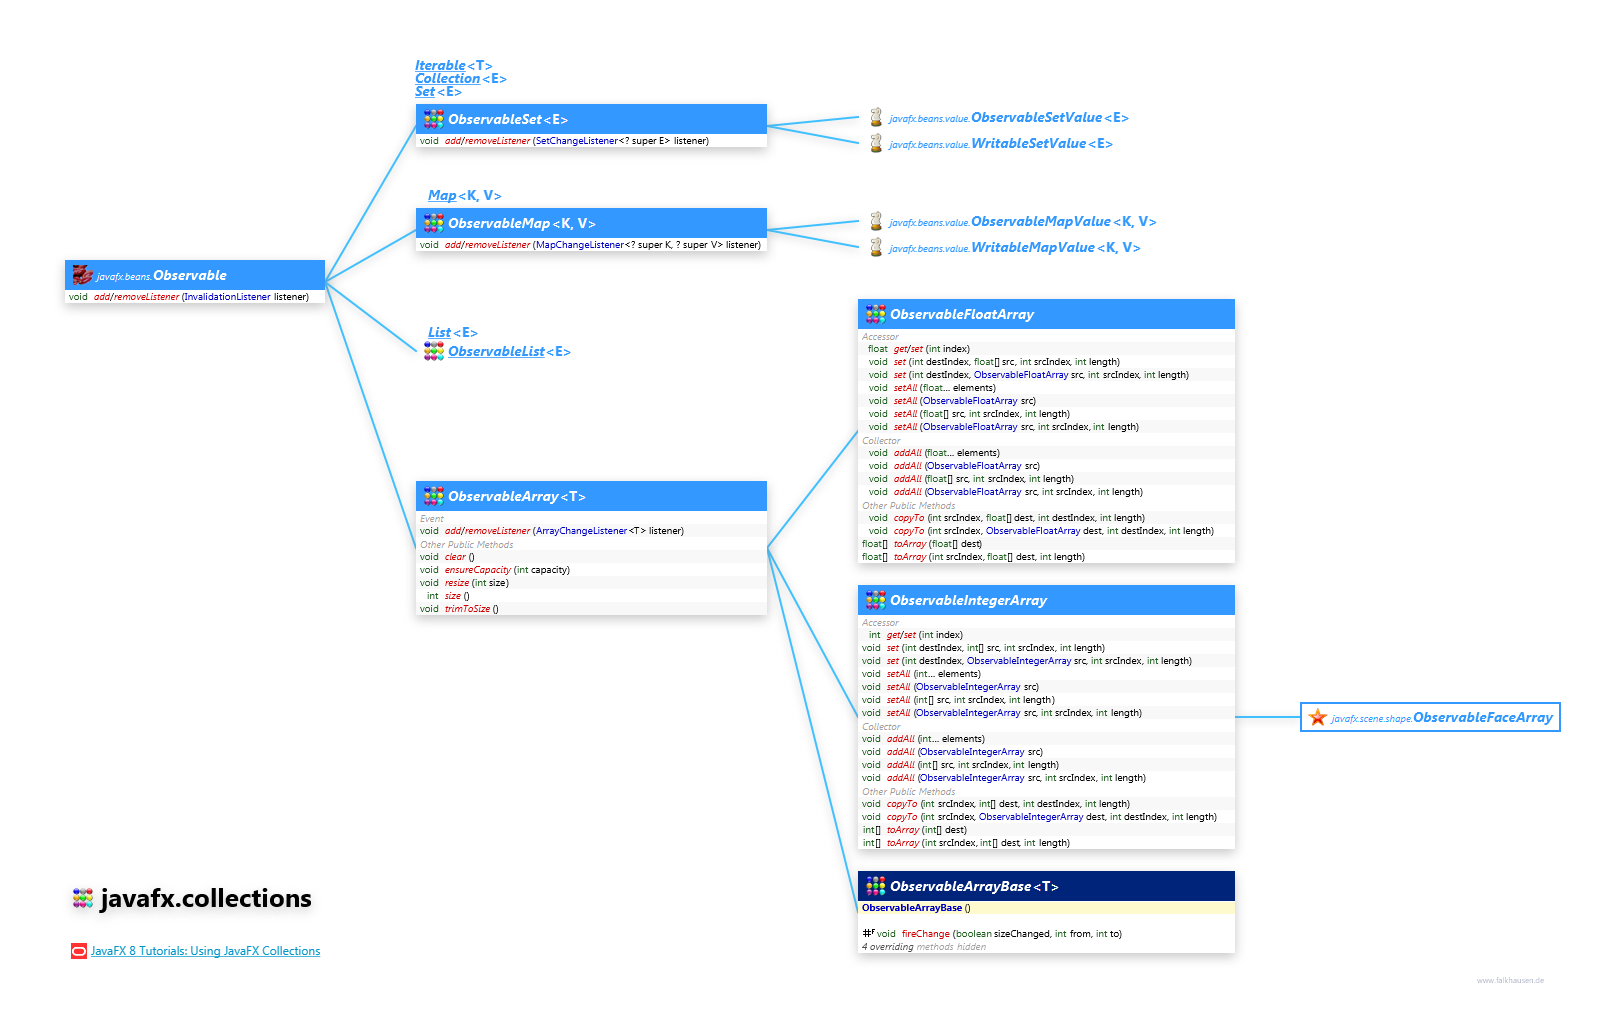 javafx.collections Observable Collection class diagram and api documentation for JavaFX 10